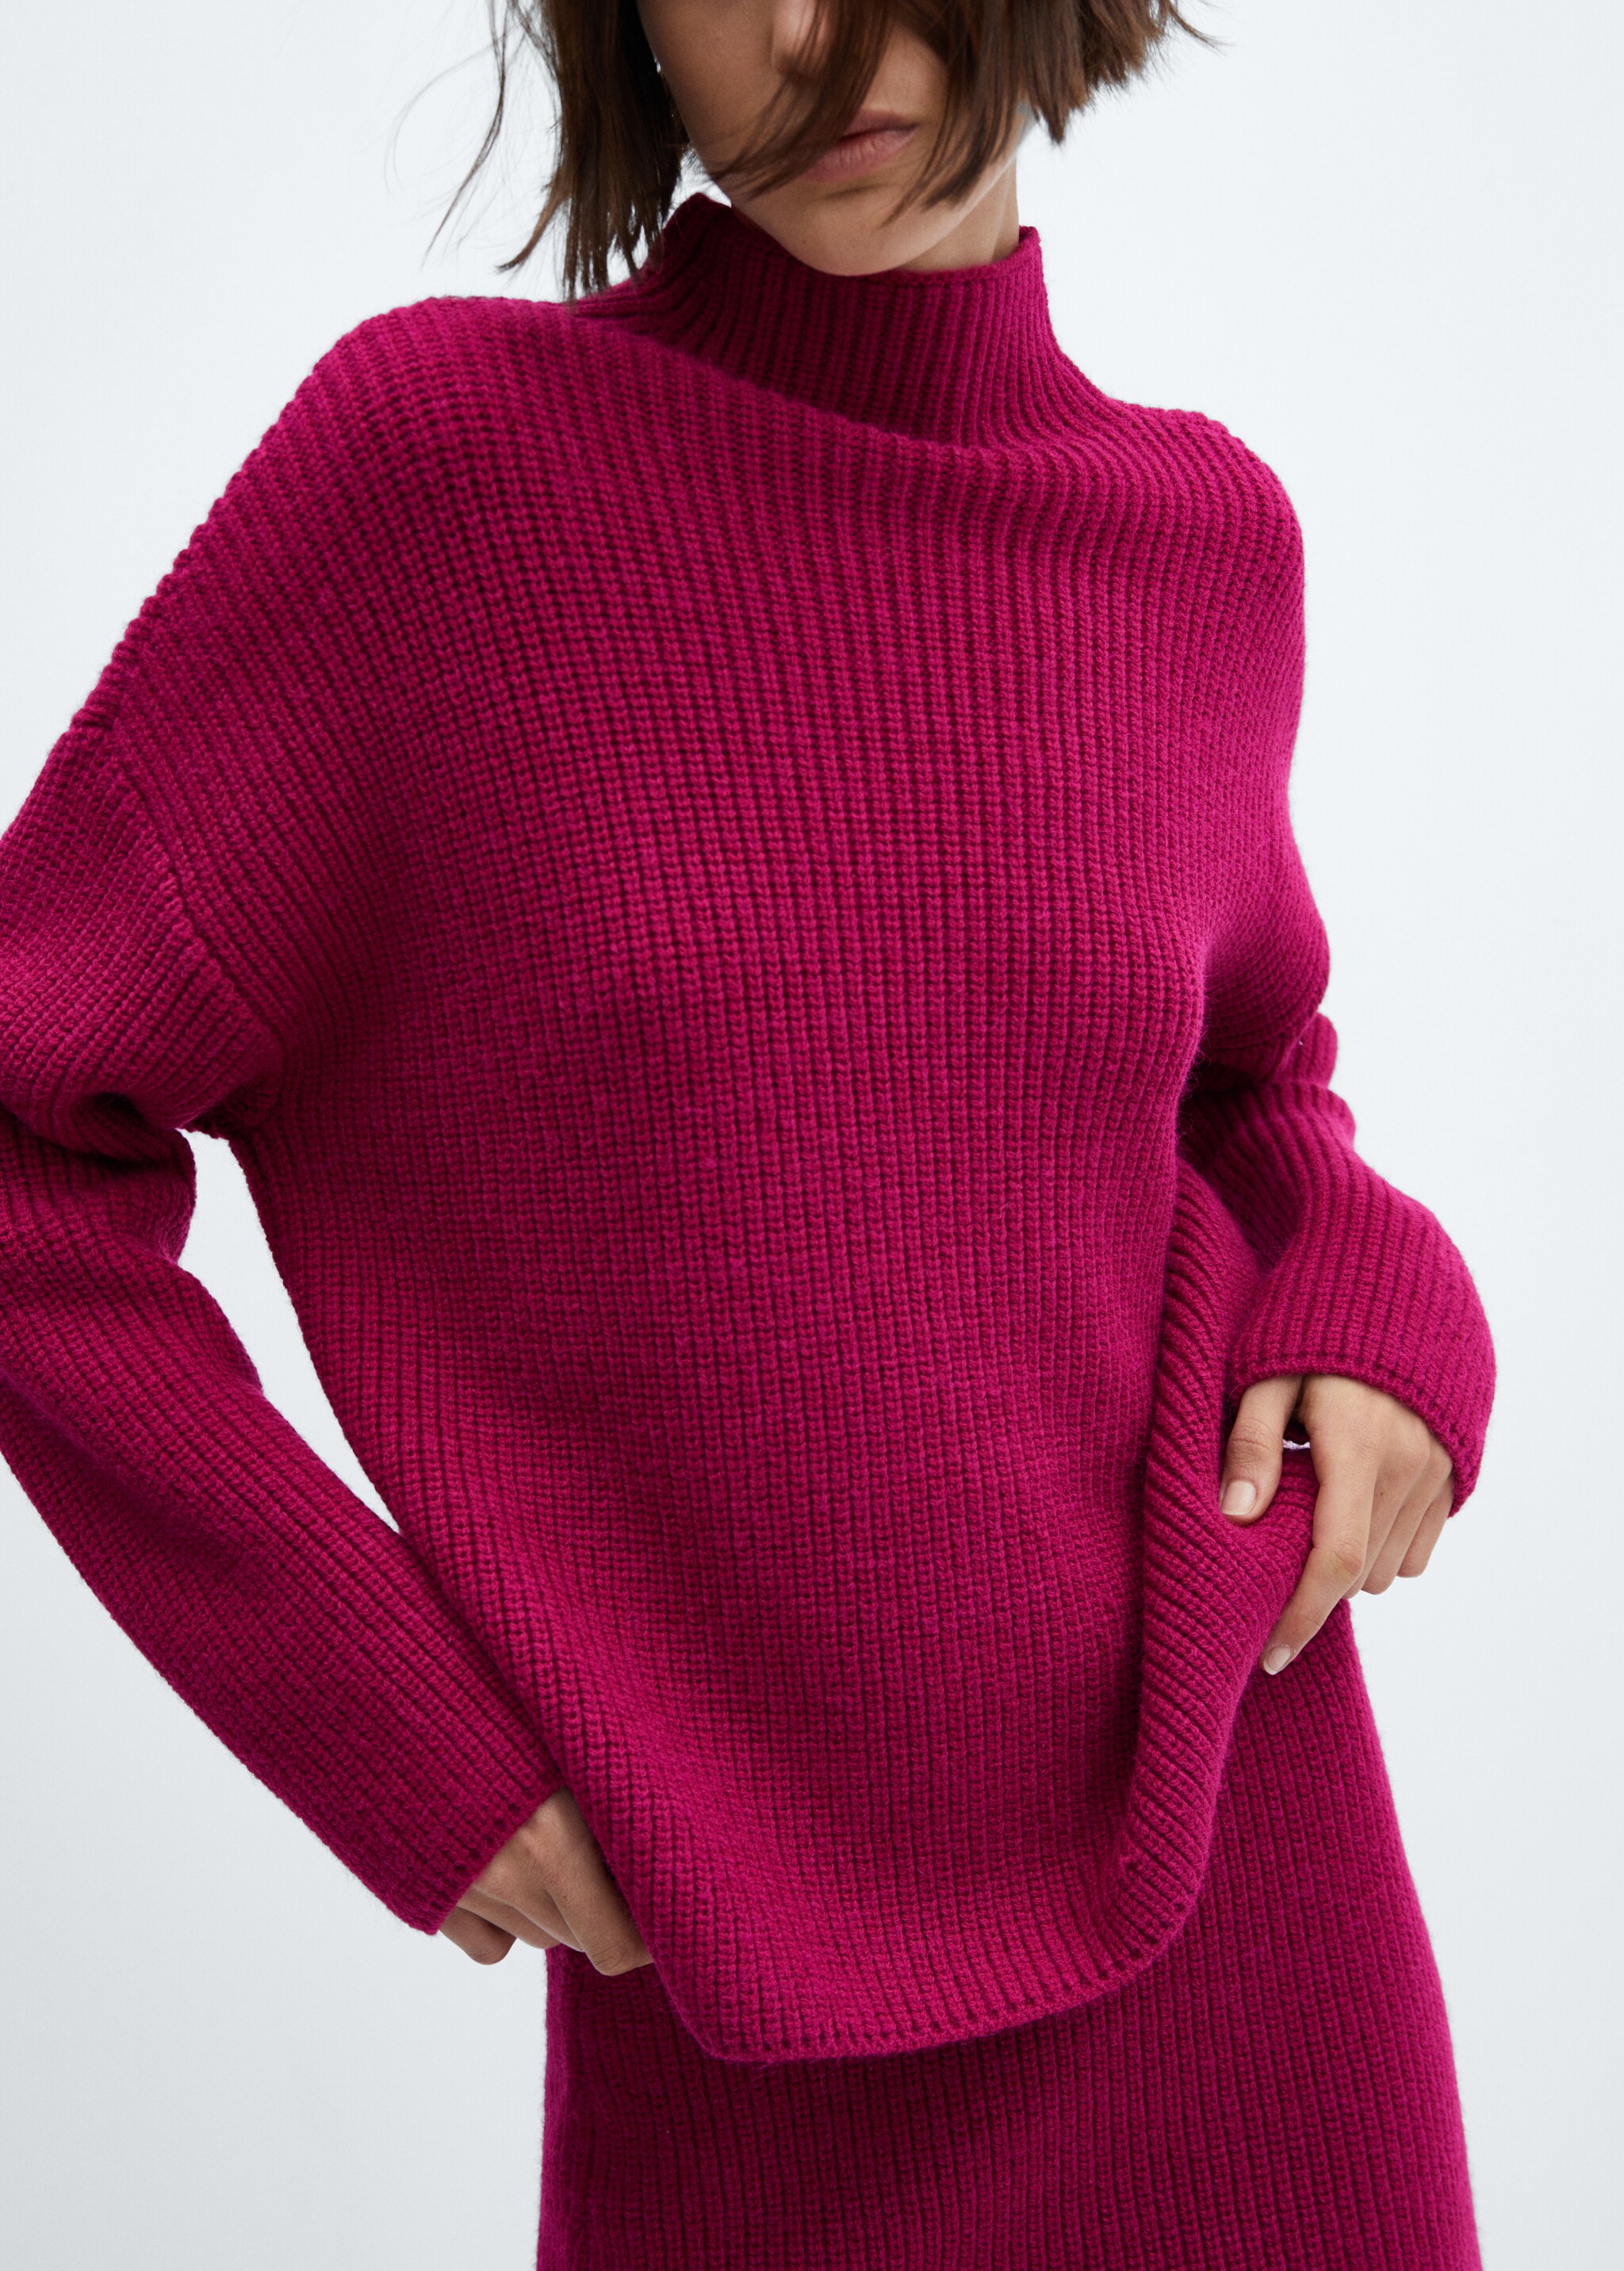 Turtleneck knit sweater - Details of the article 6